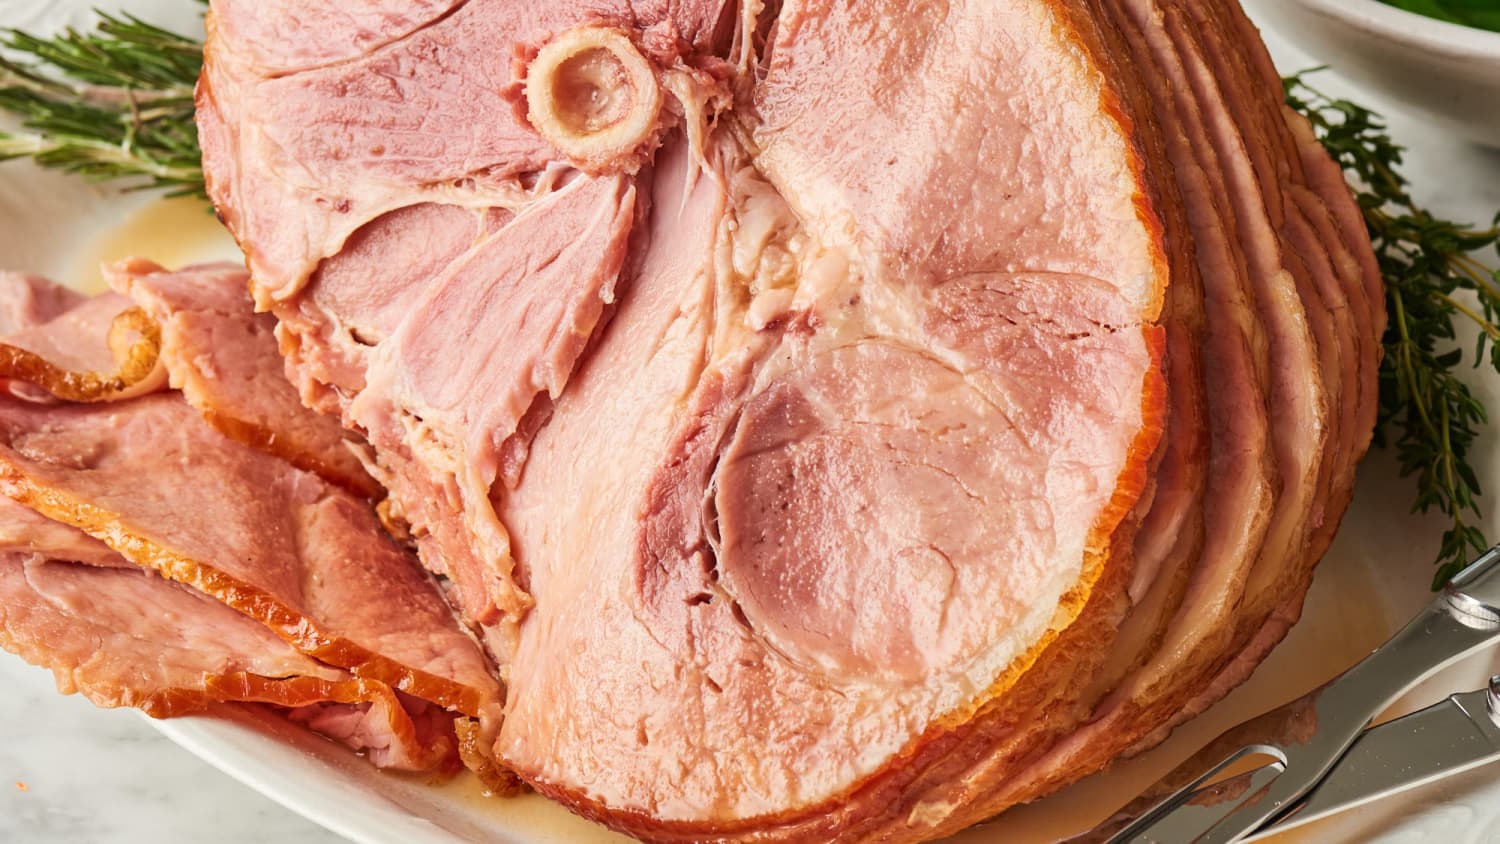 Cooking A 3 Lb. Boneless Spiral Ham In The Crockpot / Crock Pot Maple Brown Sugar Ham : A kirkland spiral ham should be cooked about 10 minutes per pound at 350 degrees.